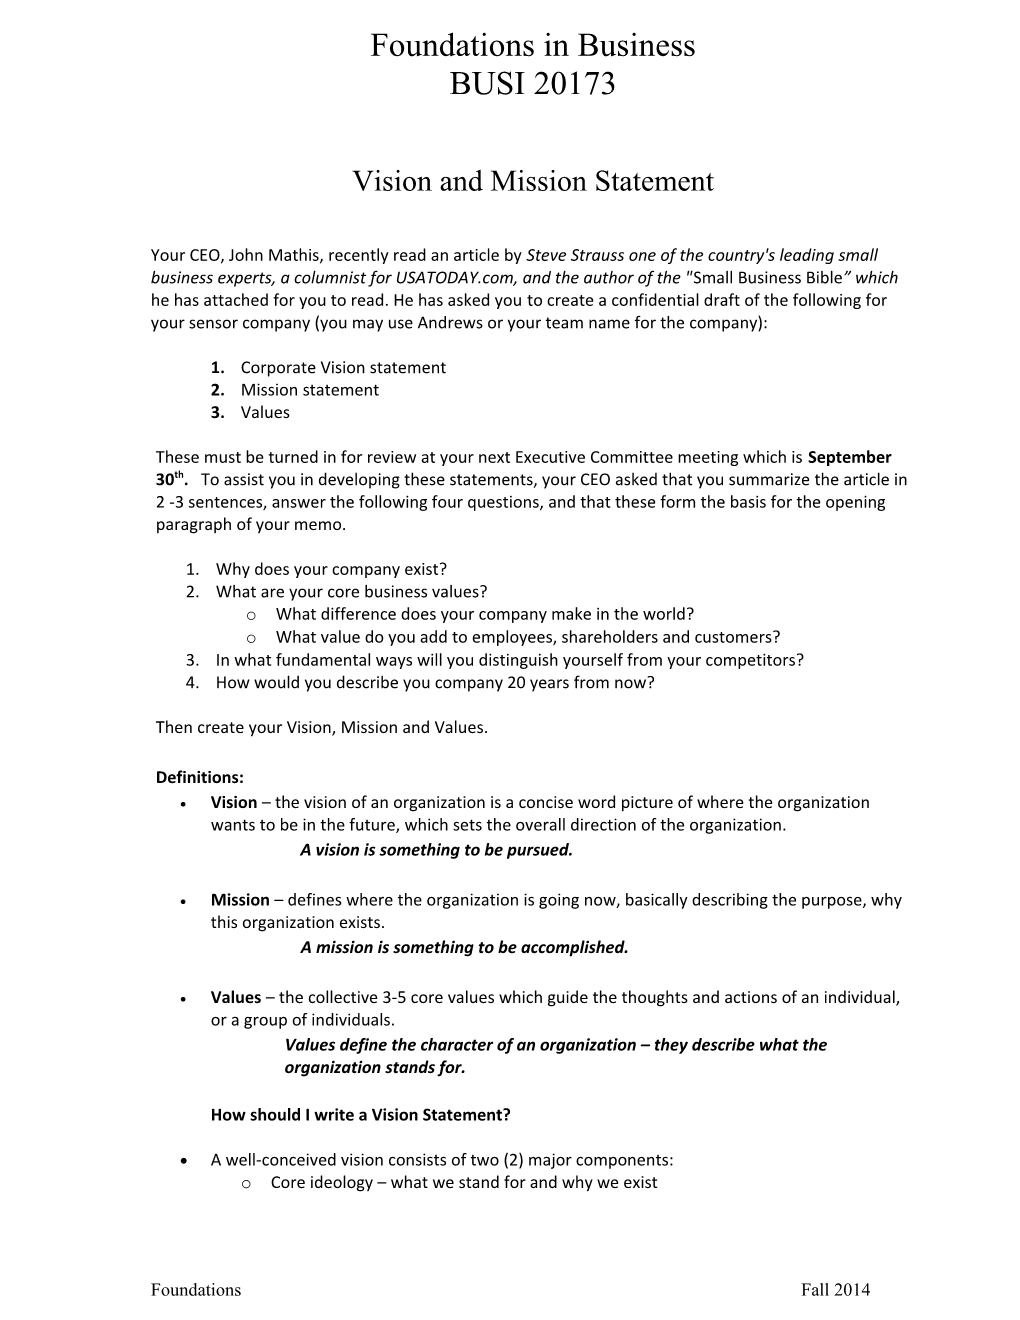 Vision and Strategy Statement